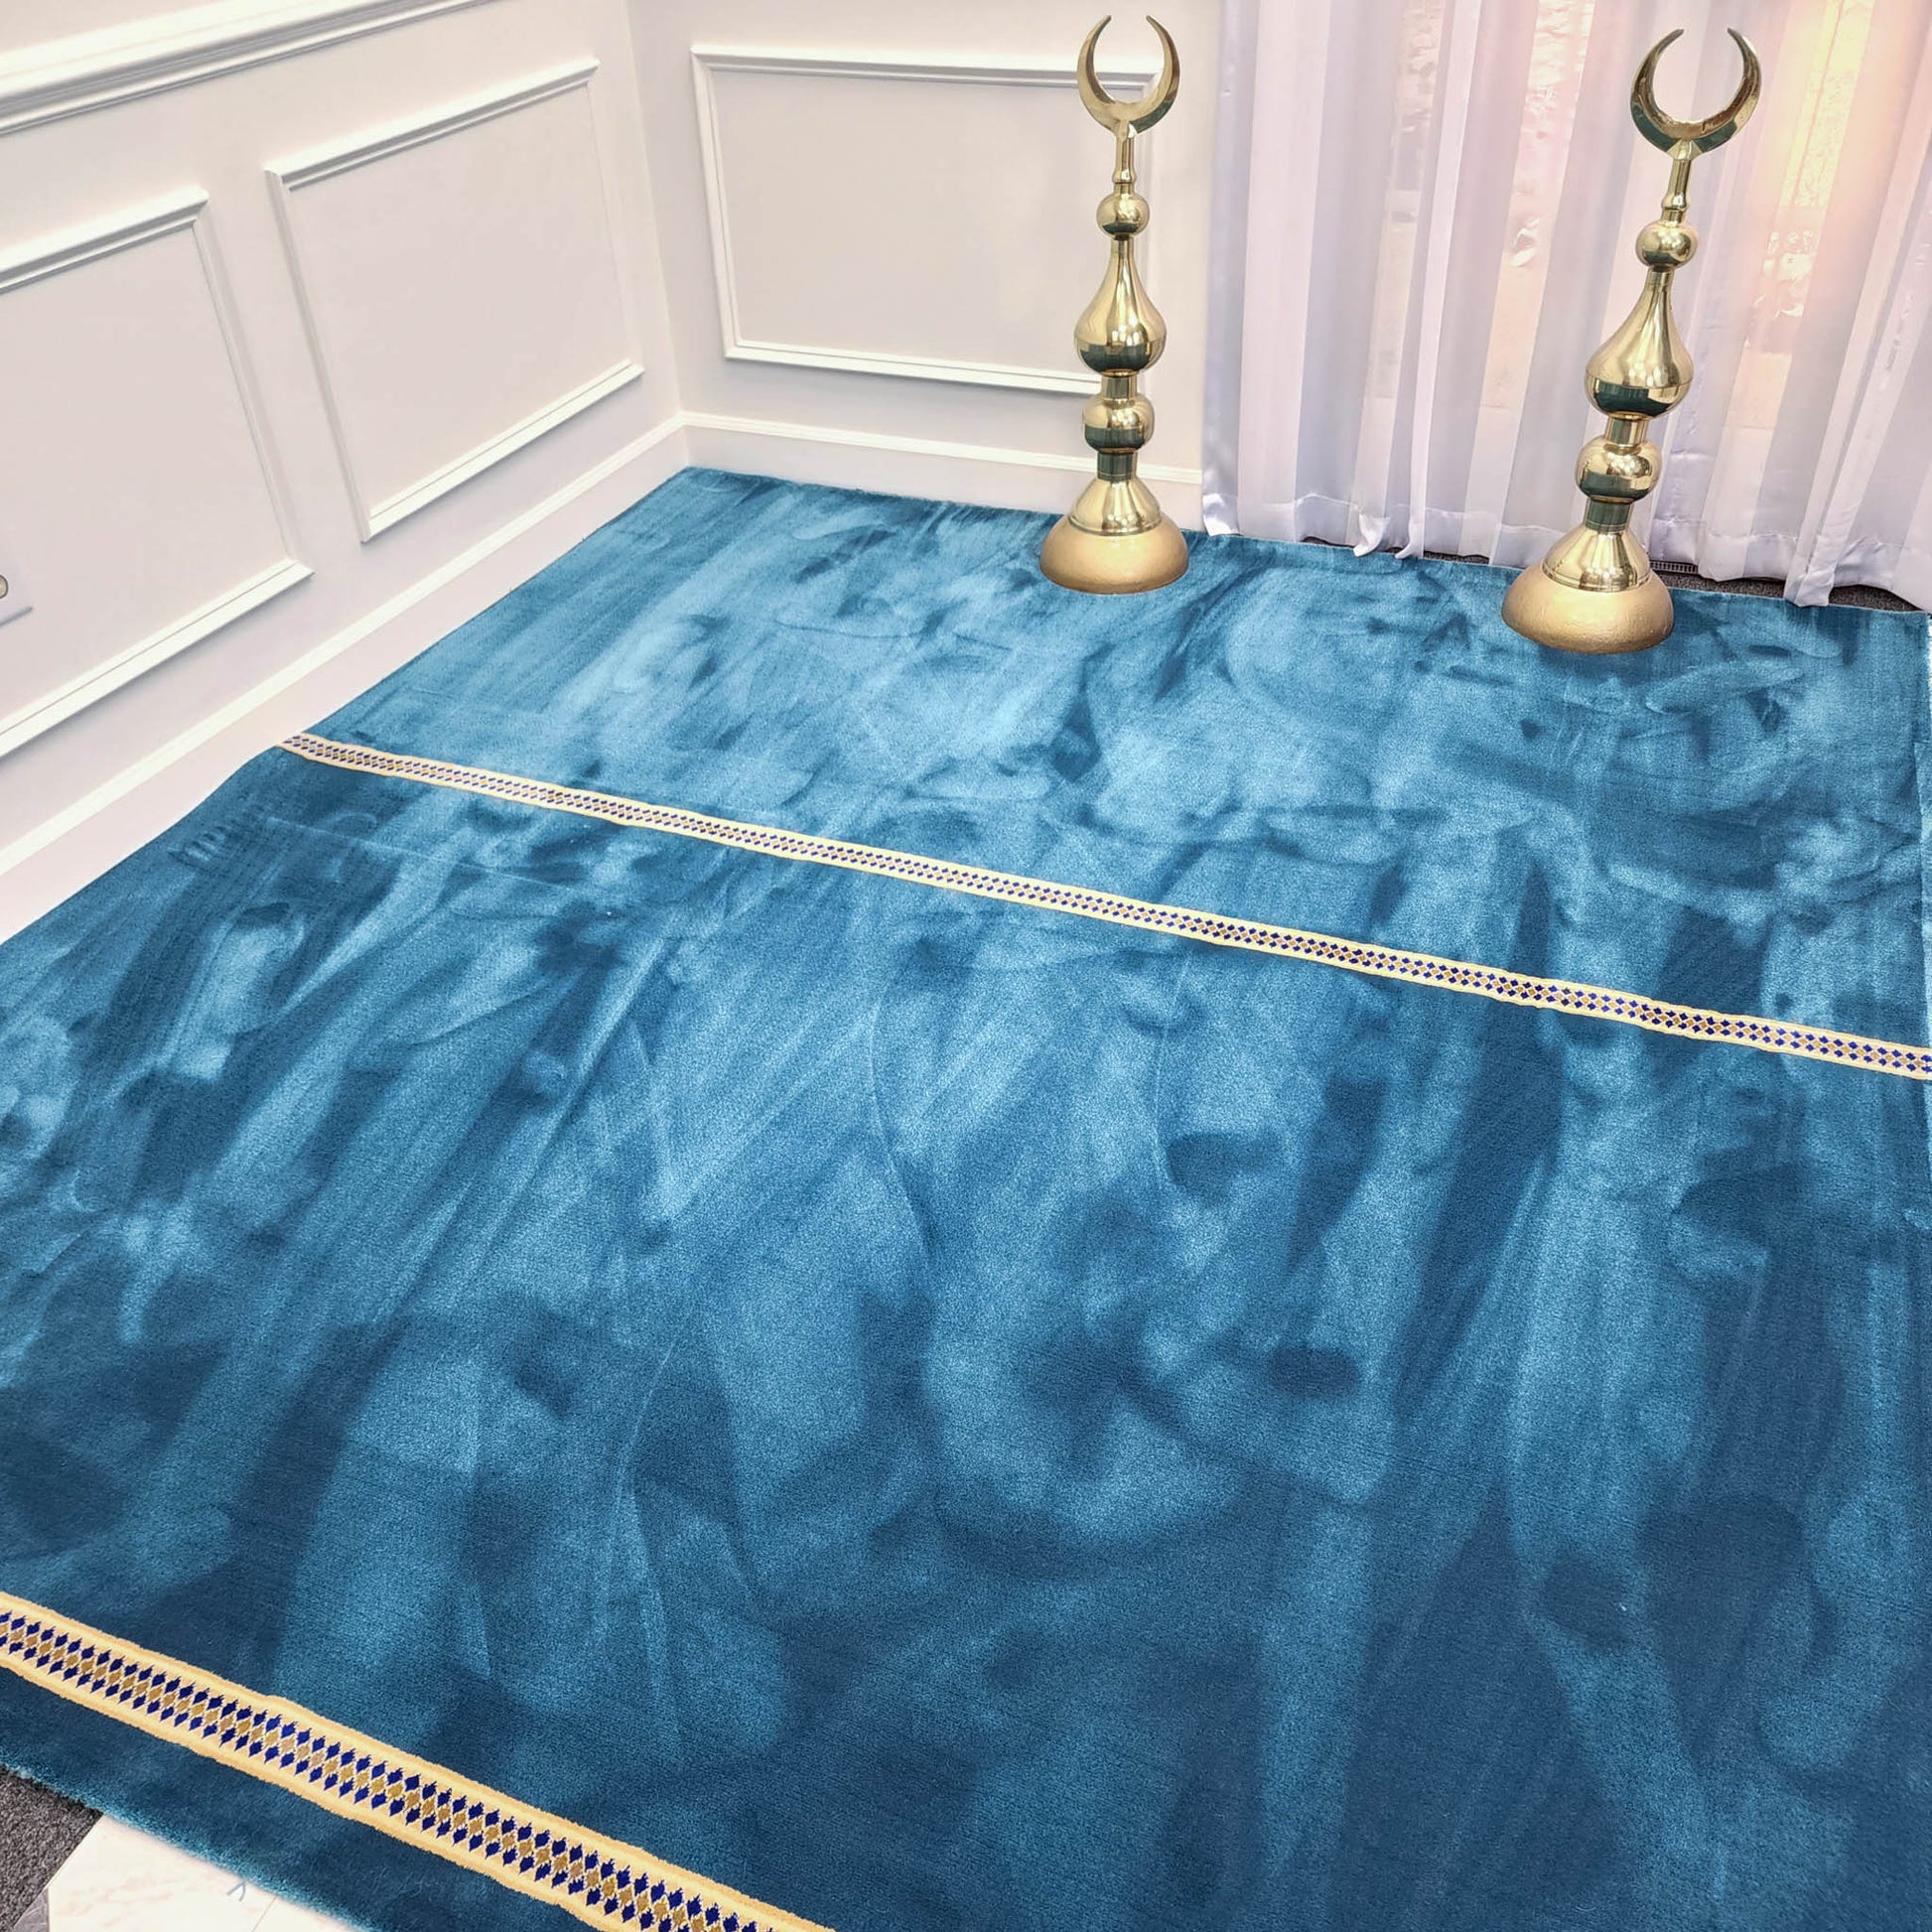 Solid simple blue prayer carpet with a thin line for islamic focused prayers.